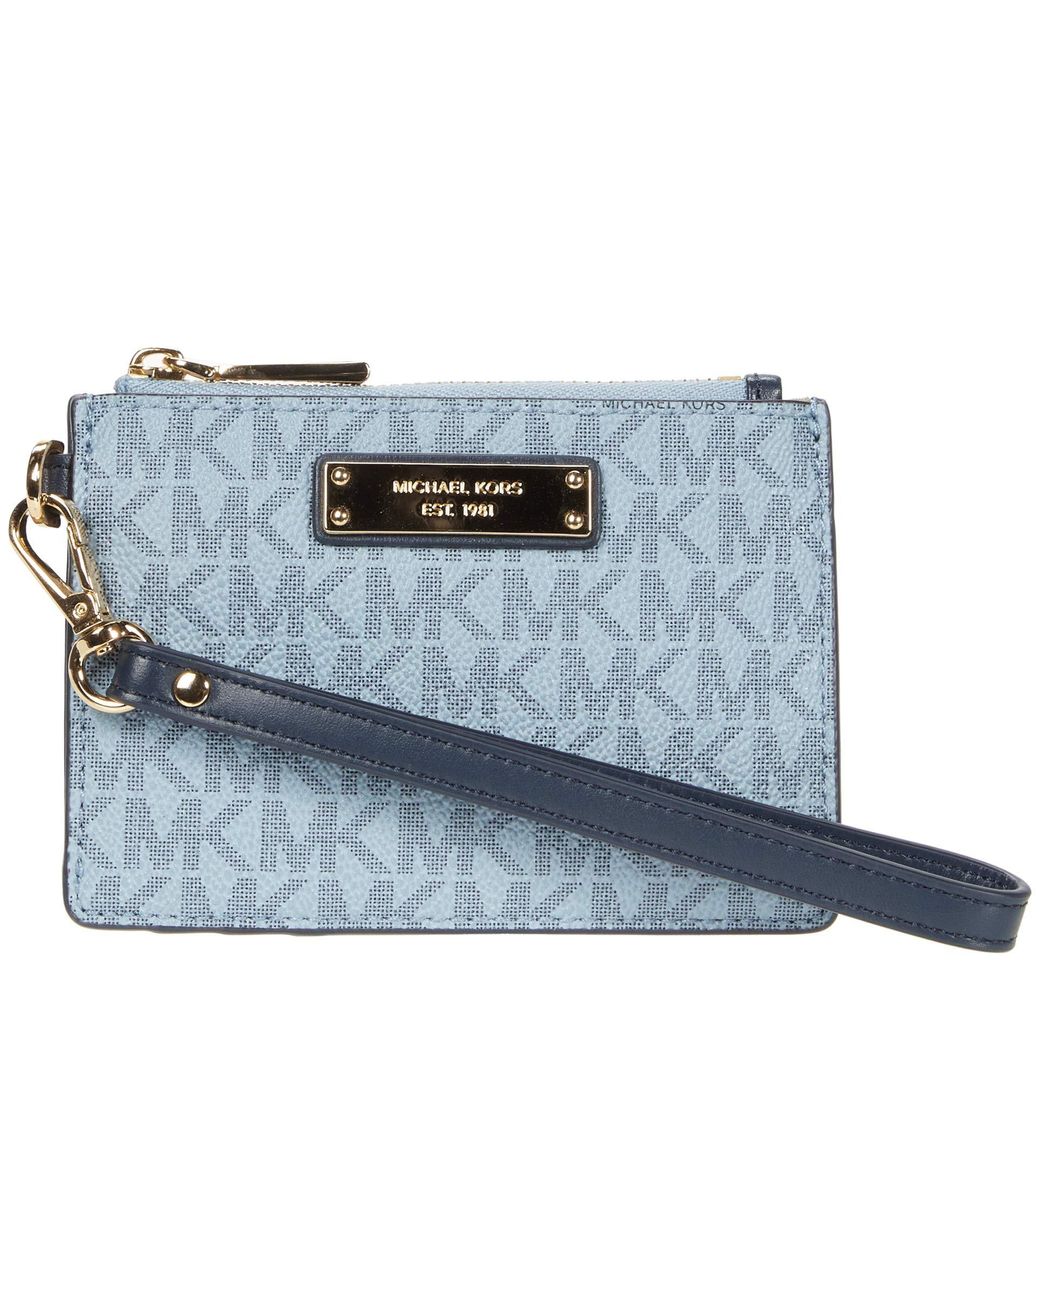 Michael Kors Mercer Small Coin Purse, Wallets, Clothing & Accessories